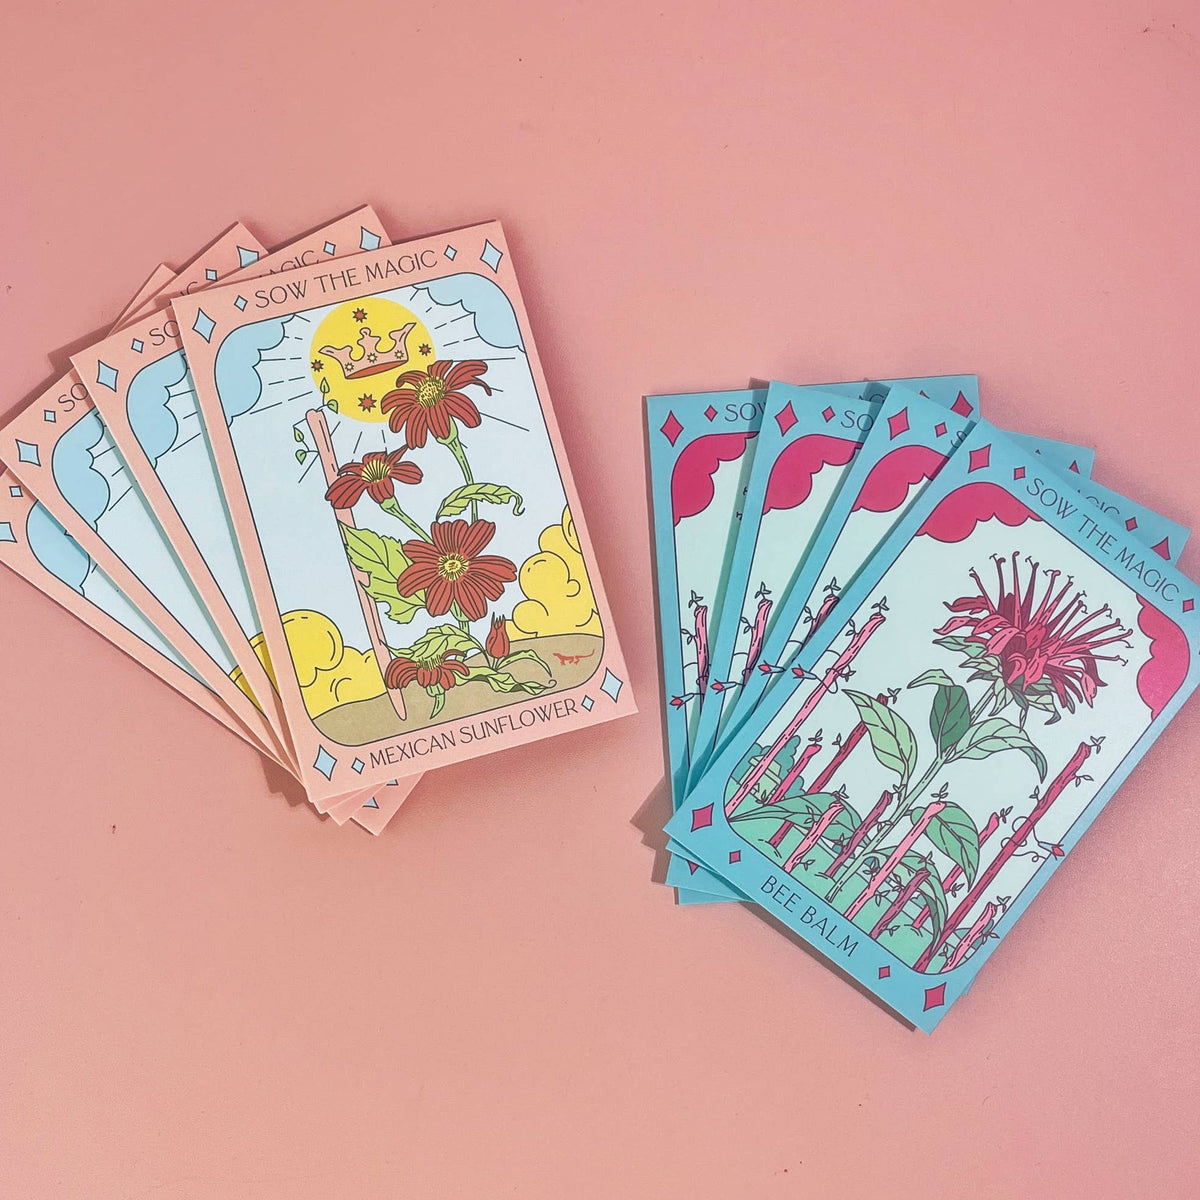 Sow the Magic Mexican Sunflower Tarot Garden + Gift Seed Packet